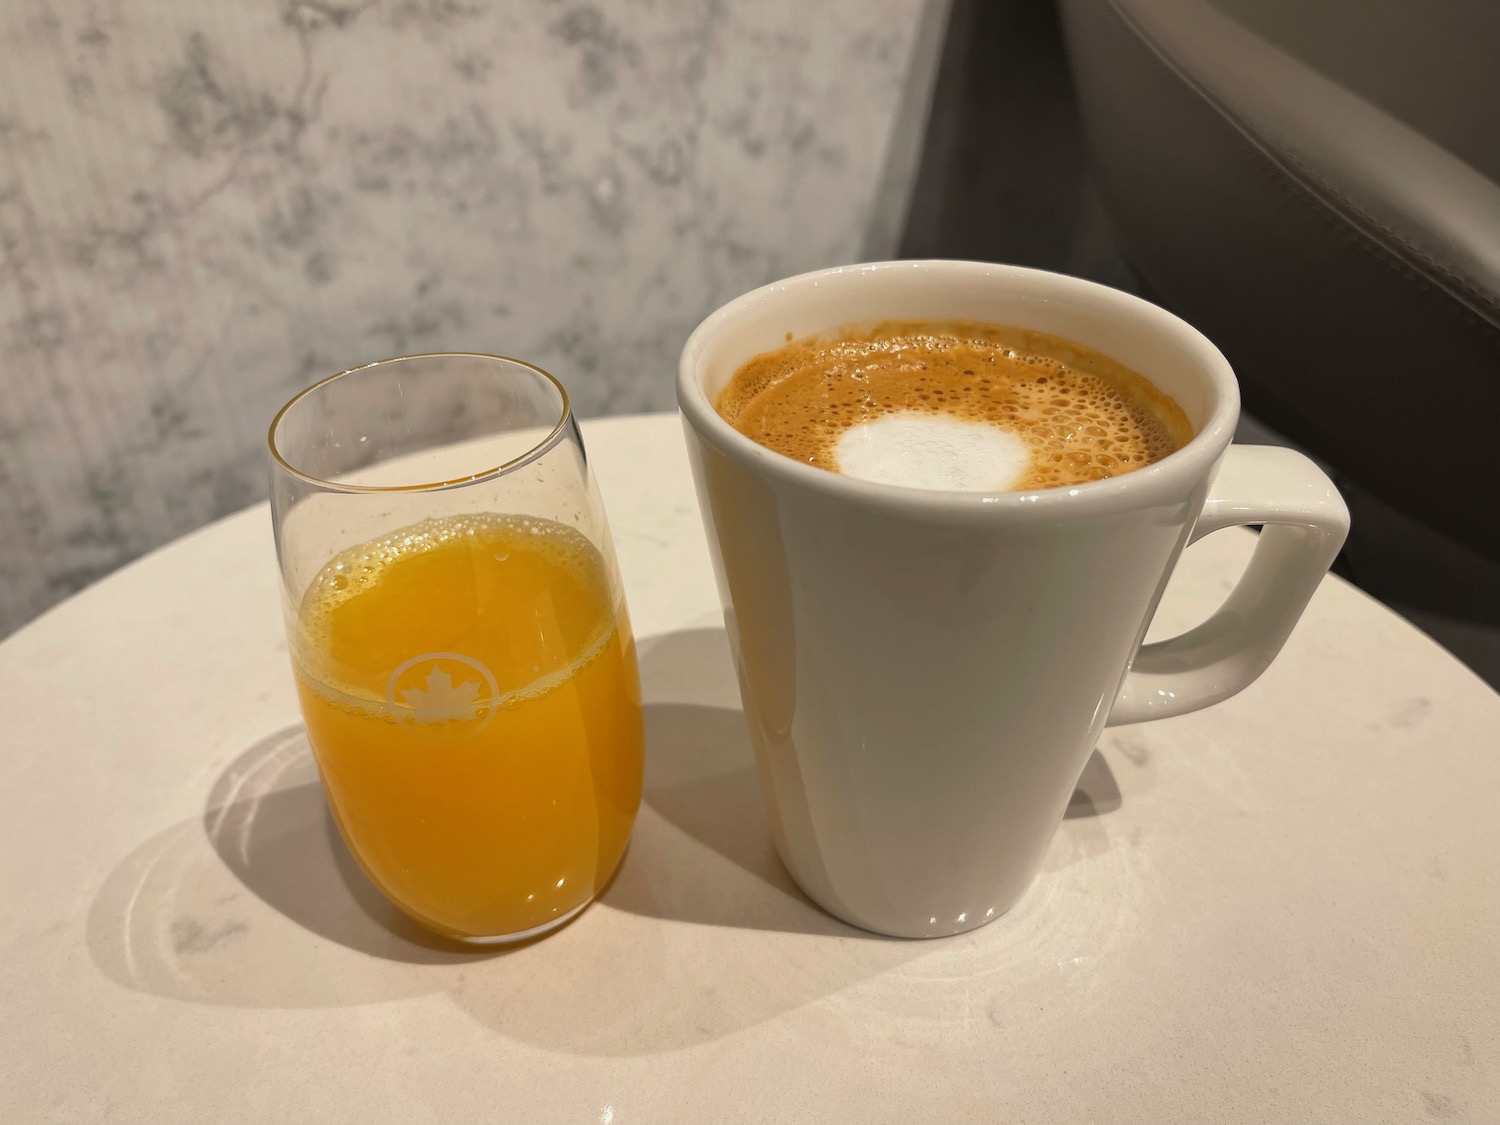 a cup of coffee and a glass of orange juice